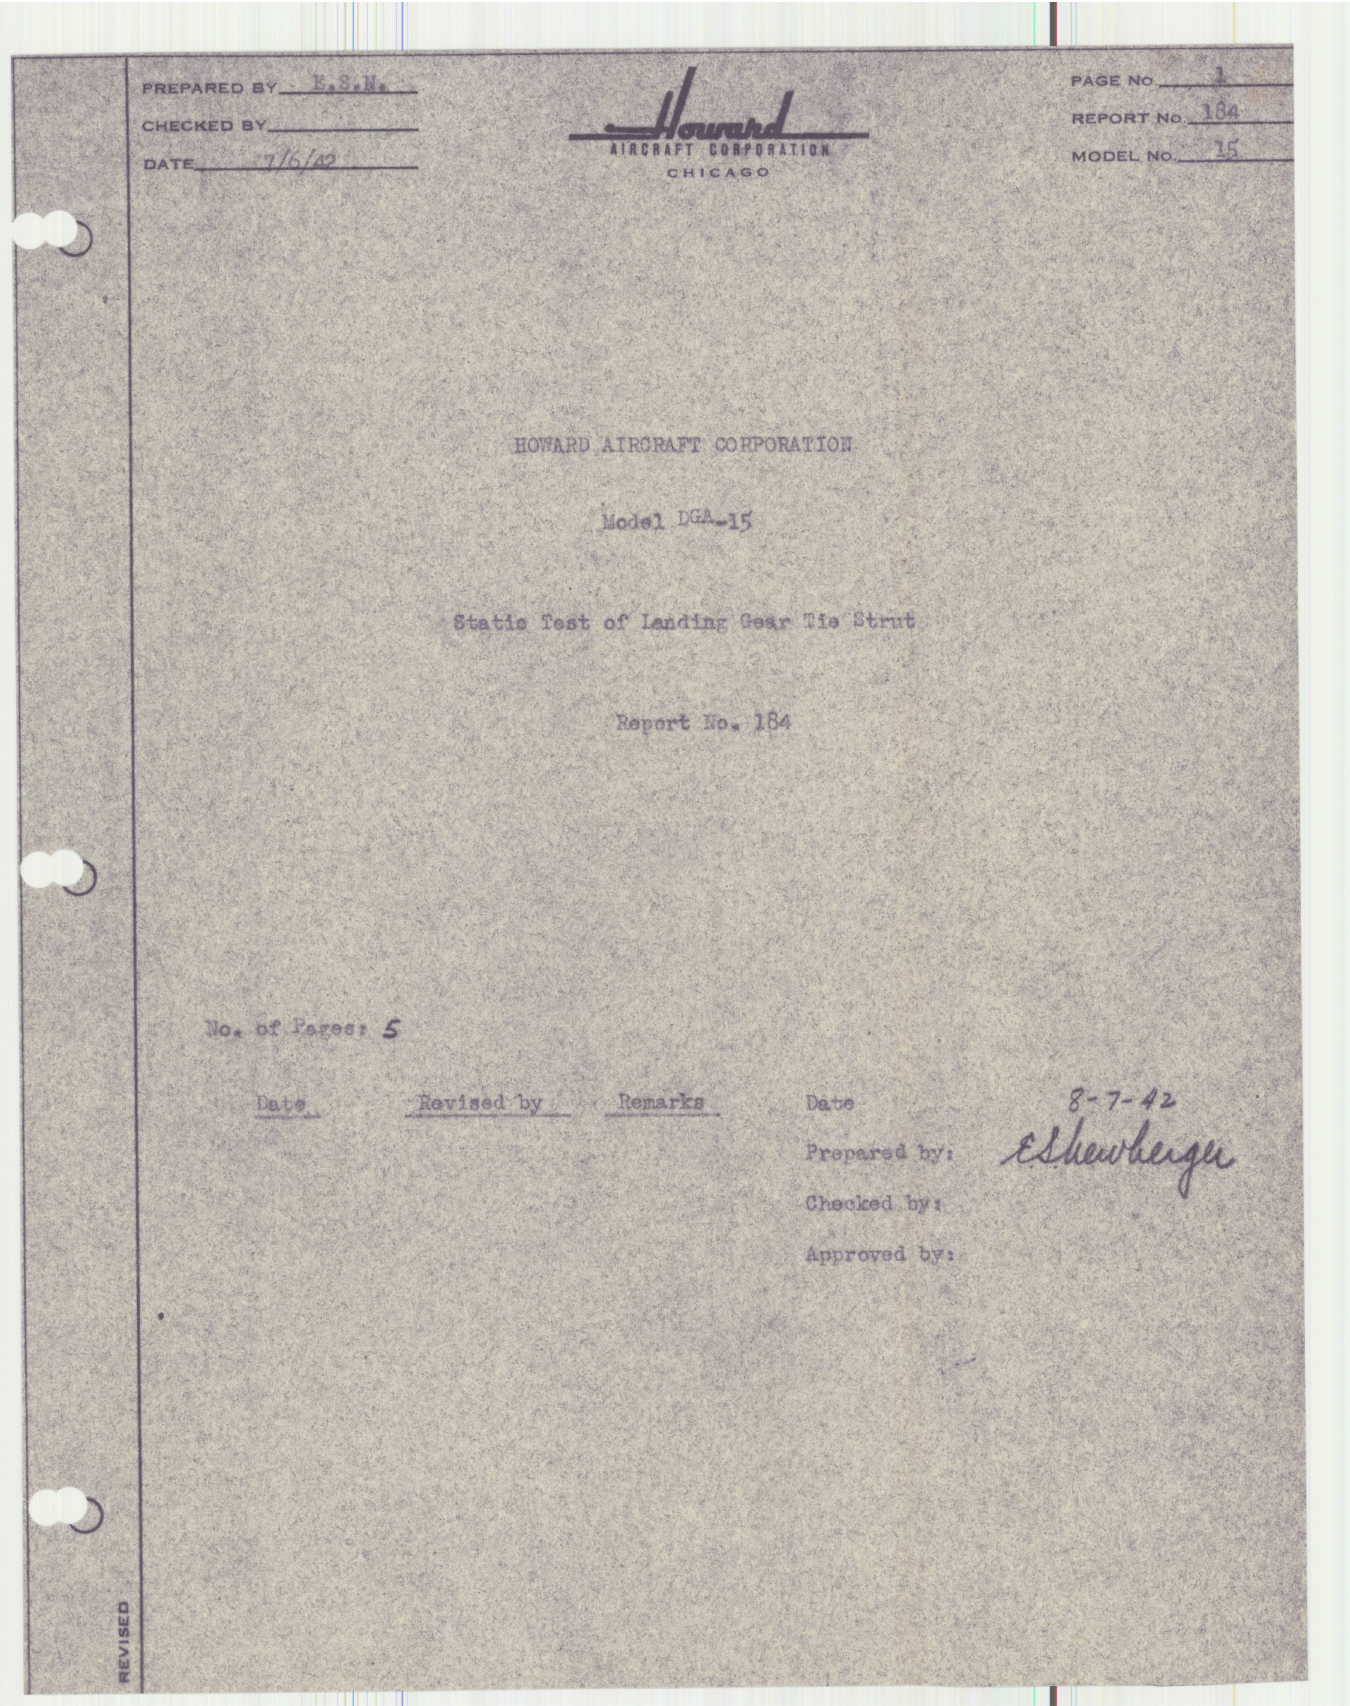 Sample page 2 from AirCorps Library document: Report 184, Static Test of Landing Gear Tie Strut, DGA-15